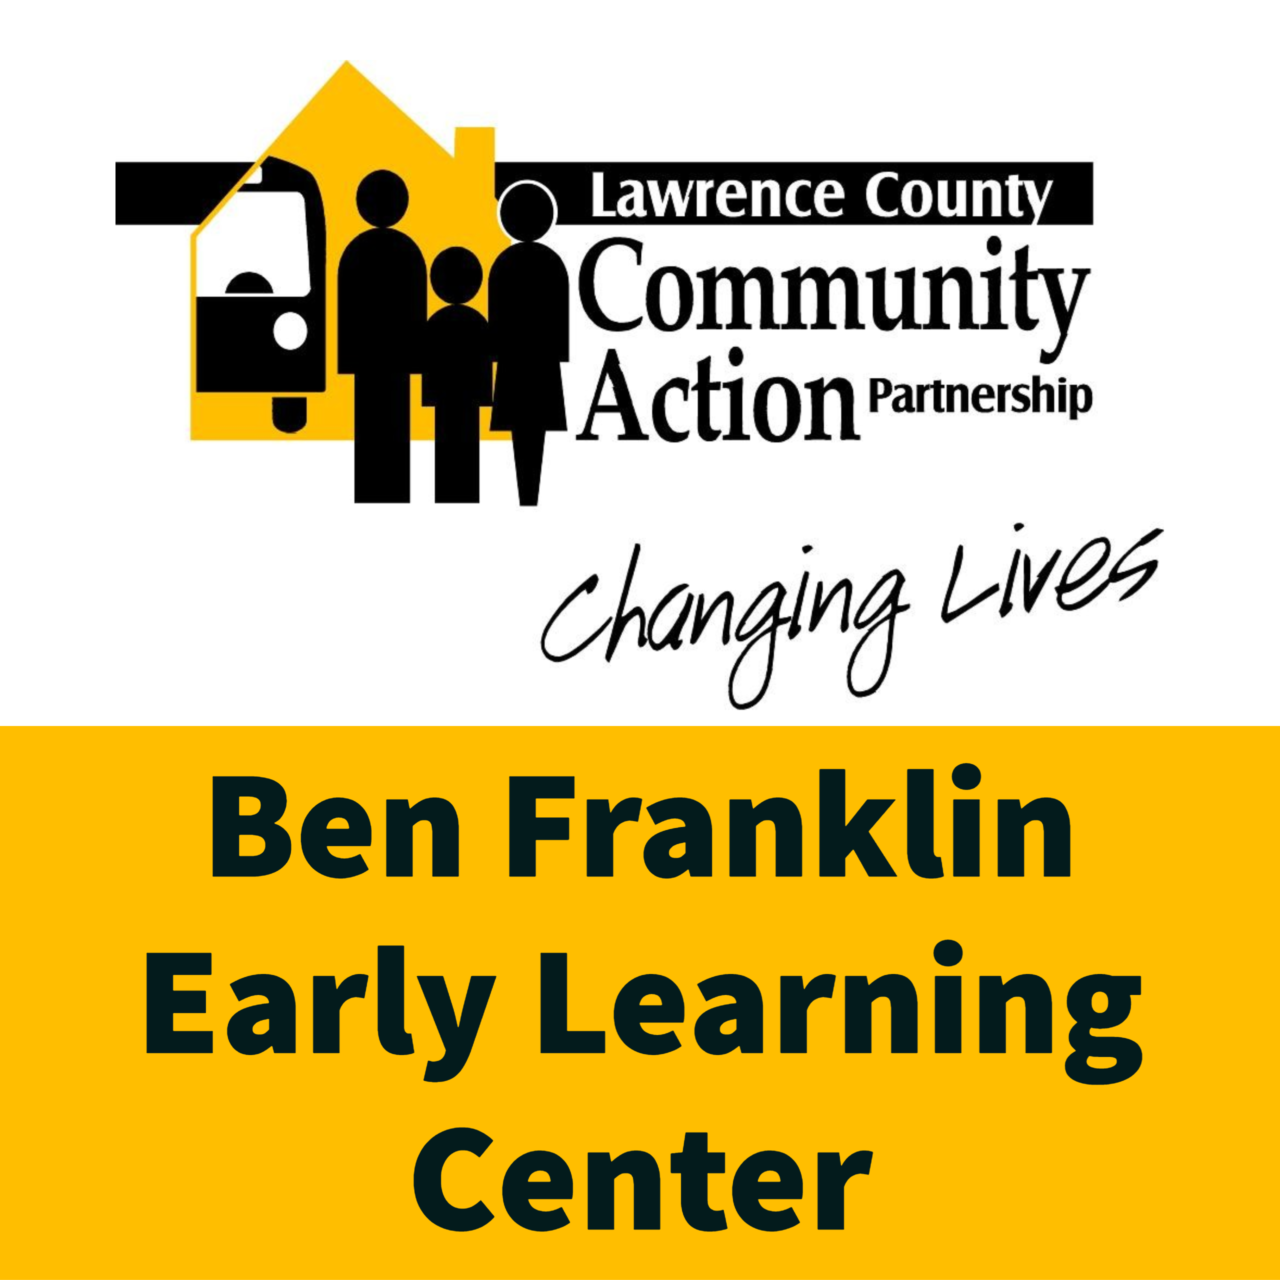 Ben Franklin Early Learning Center